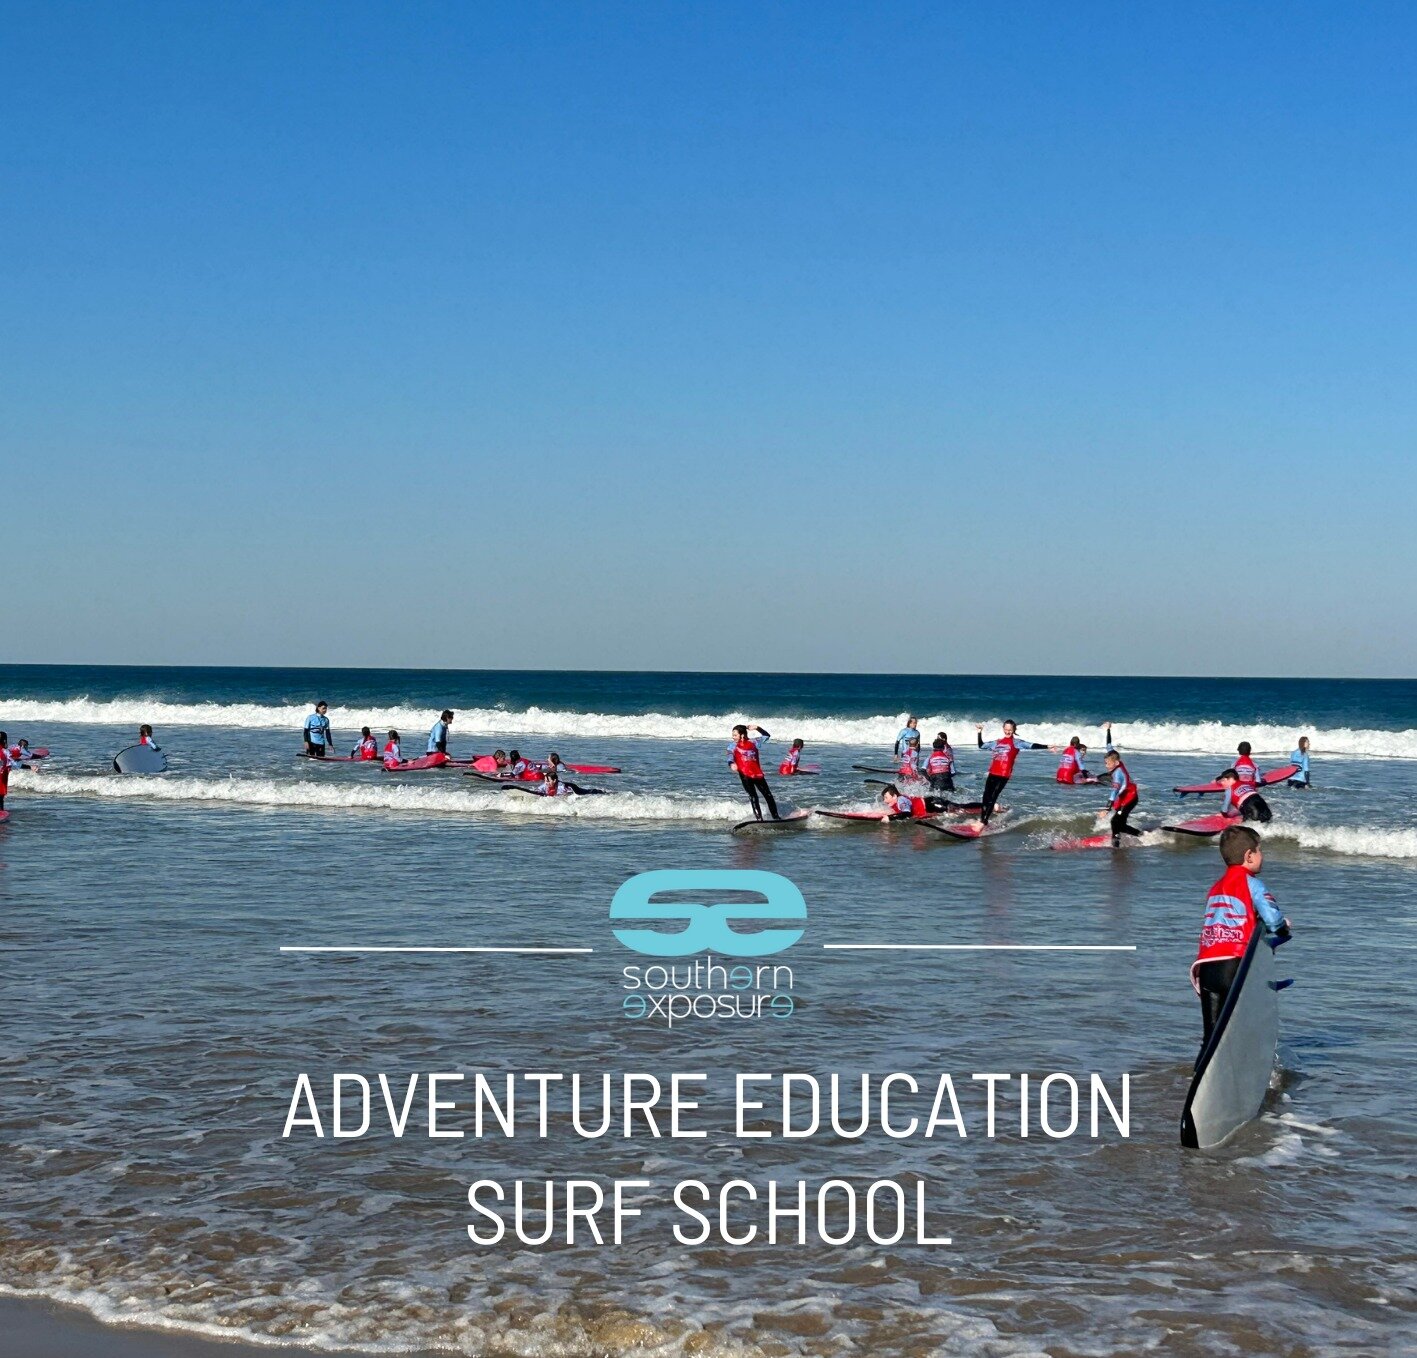 SURF SCHOOL IS ON 🏄

We set you up for success! 
You teach them to slip, slop, slap - 
We'll teach them to paddle, pull up, and stand!

With all the gear provided for you, as well as engaging and certified instructors. 
So picture you and your class